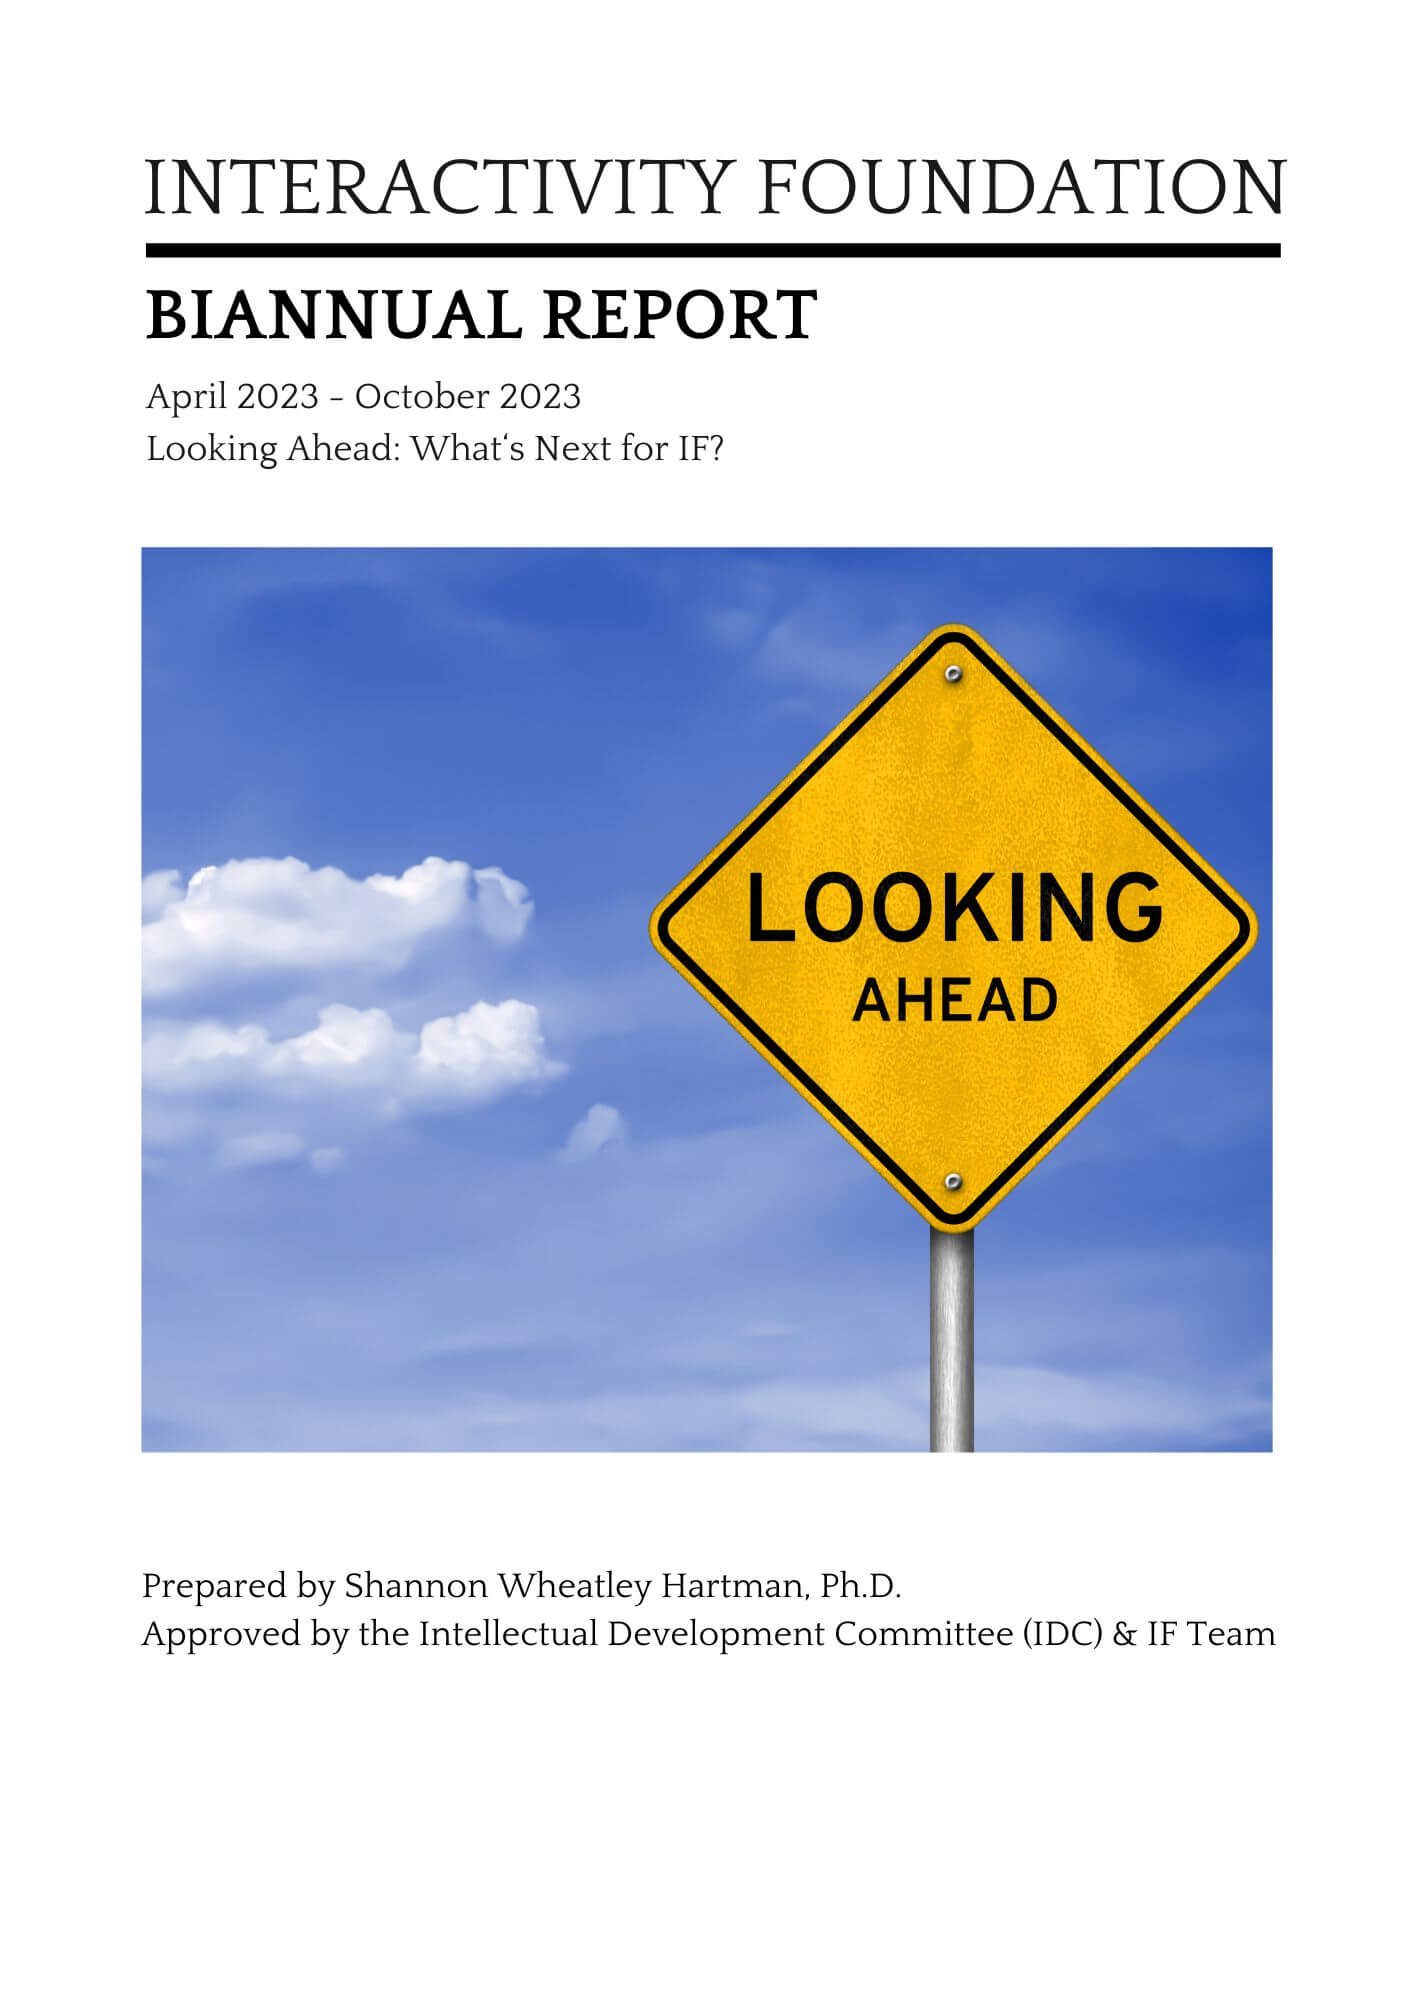 Cover Page of October 2023 Biannual Report